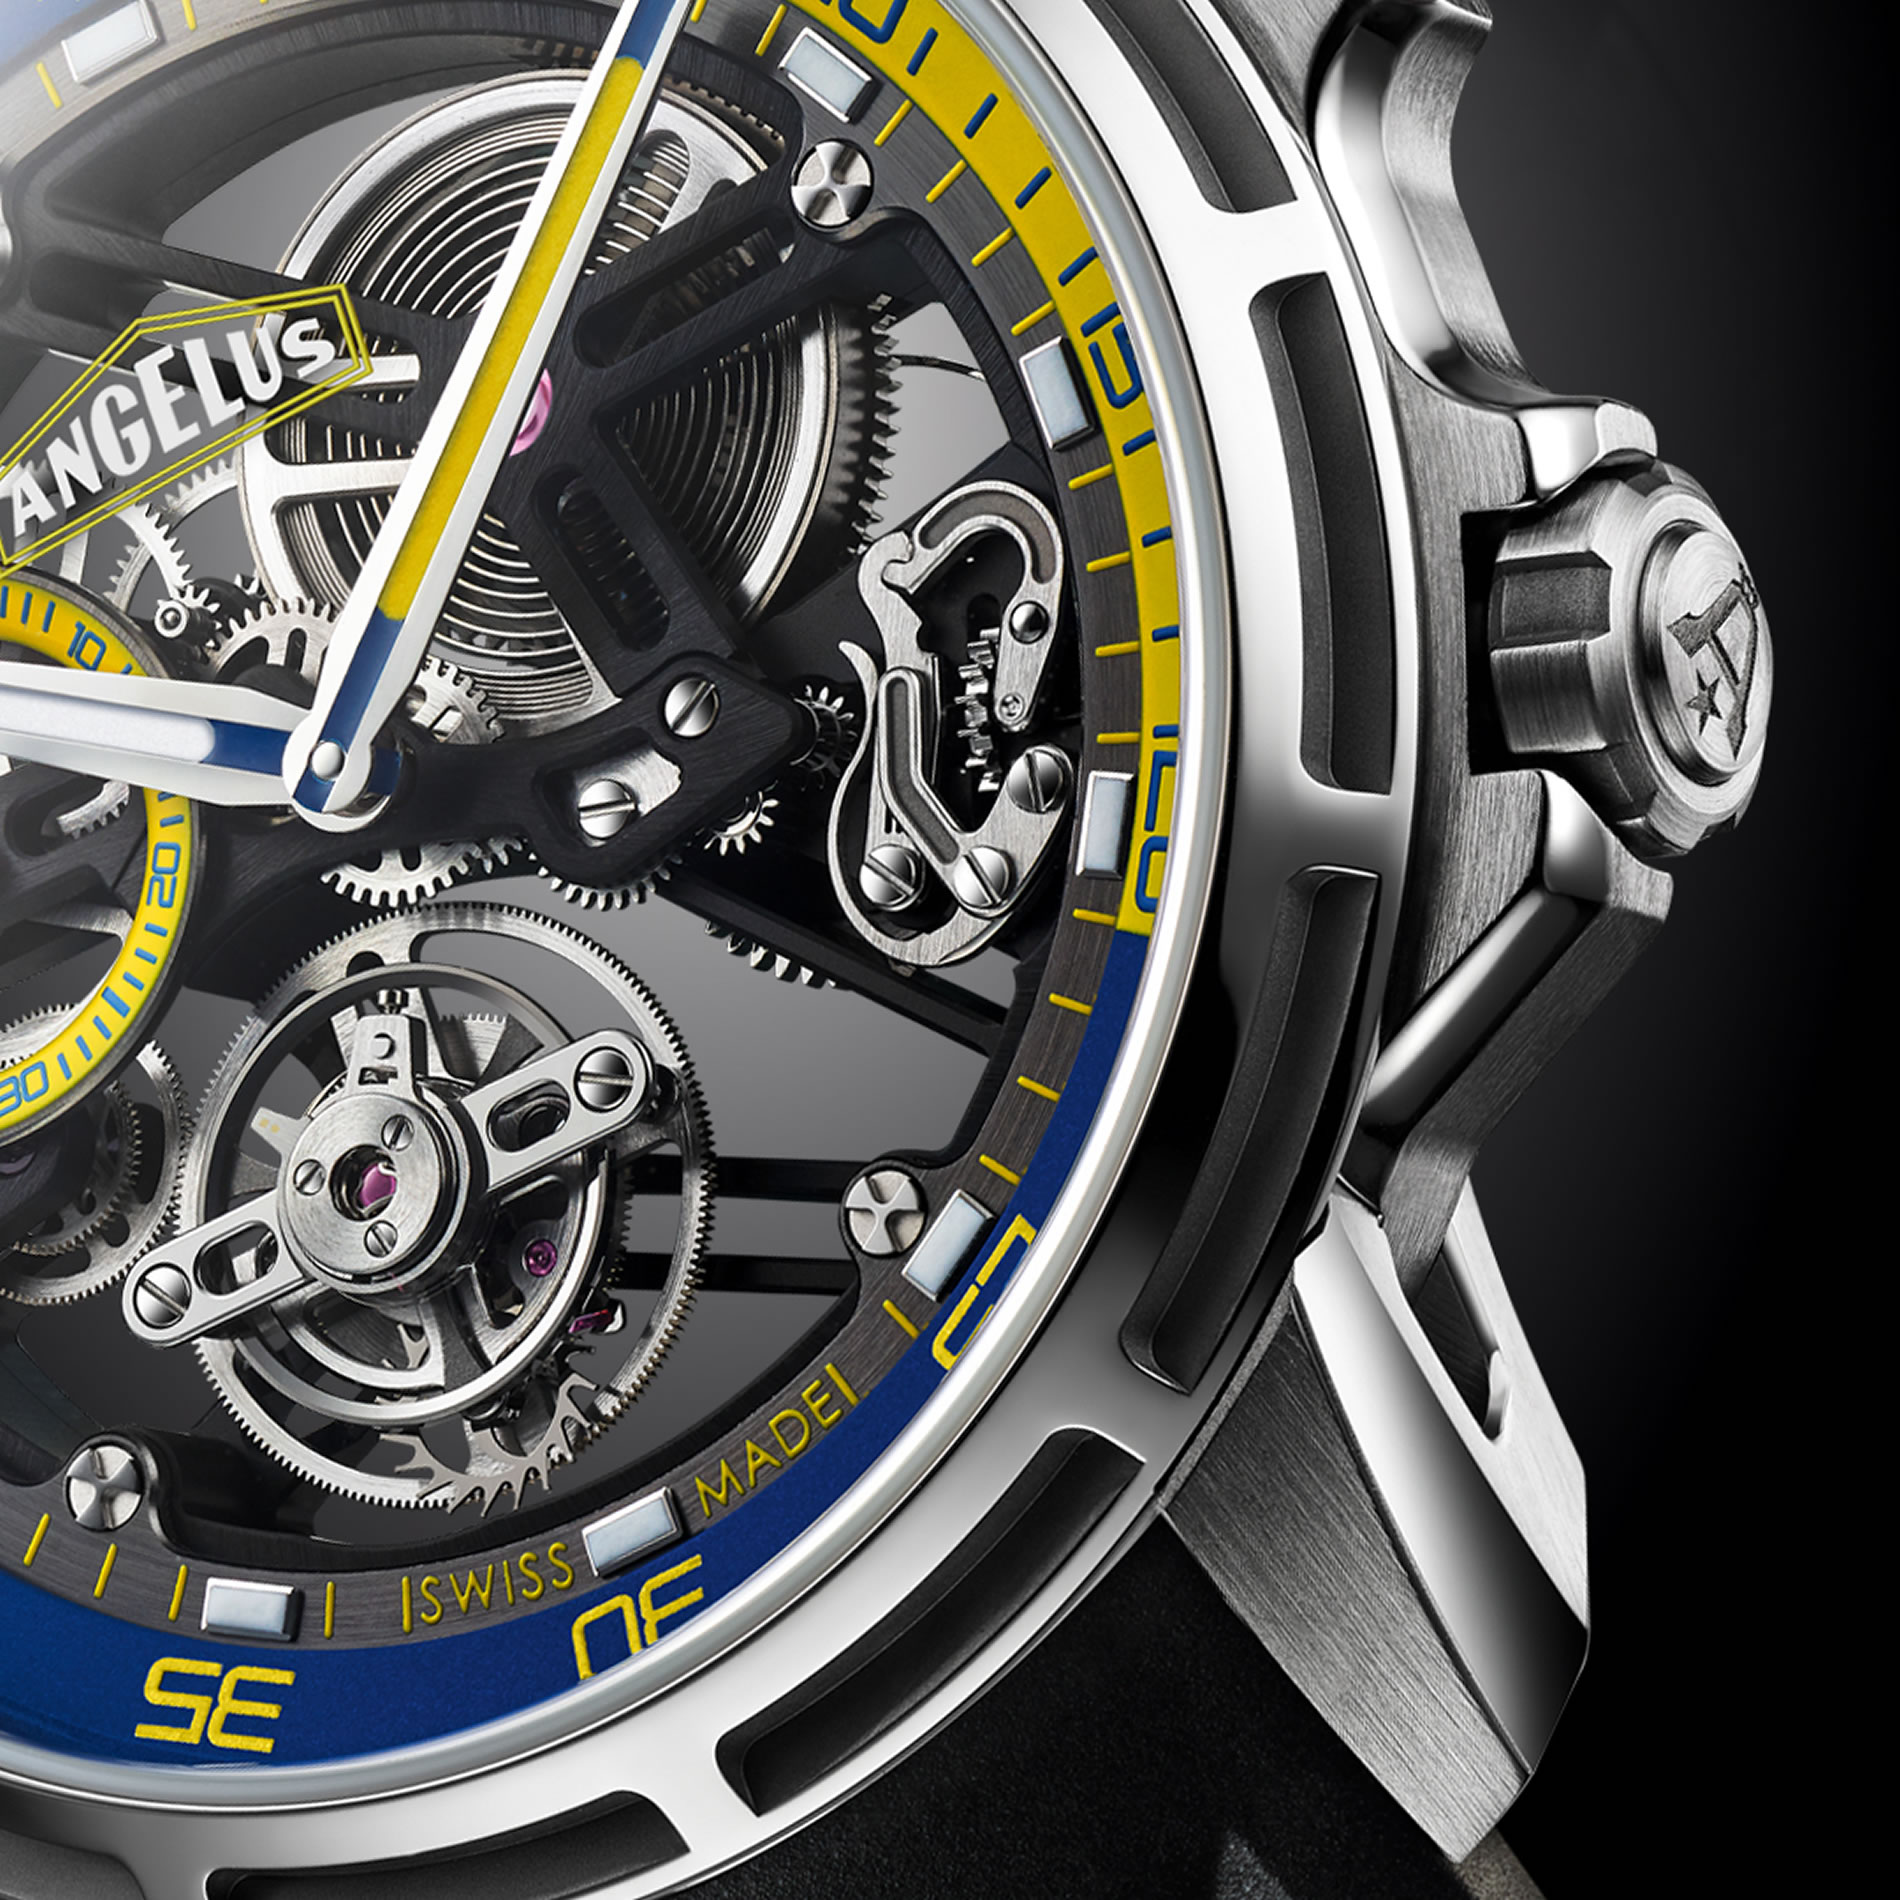 Angelus reaches new depths far below sea level with its first diver’s watch, the U50 Diver Tourbillon.